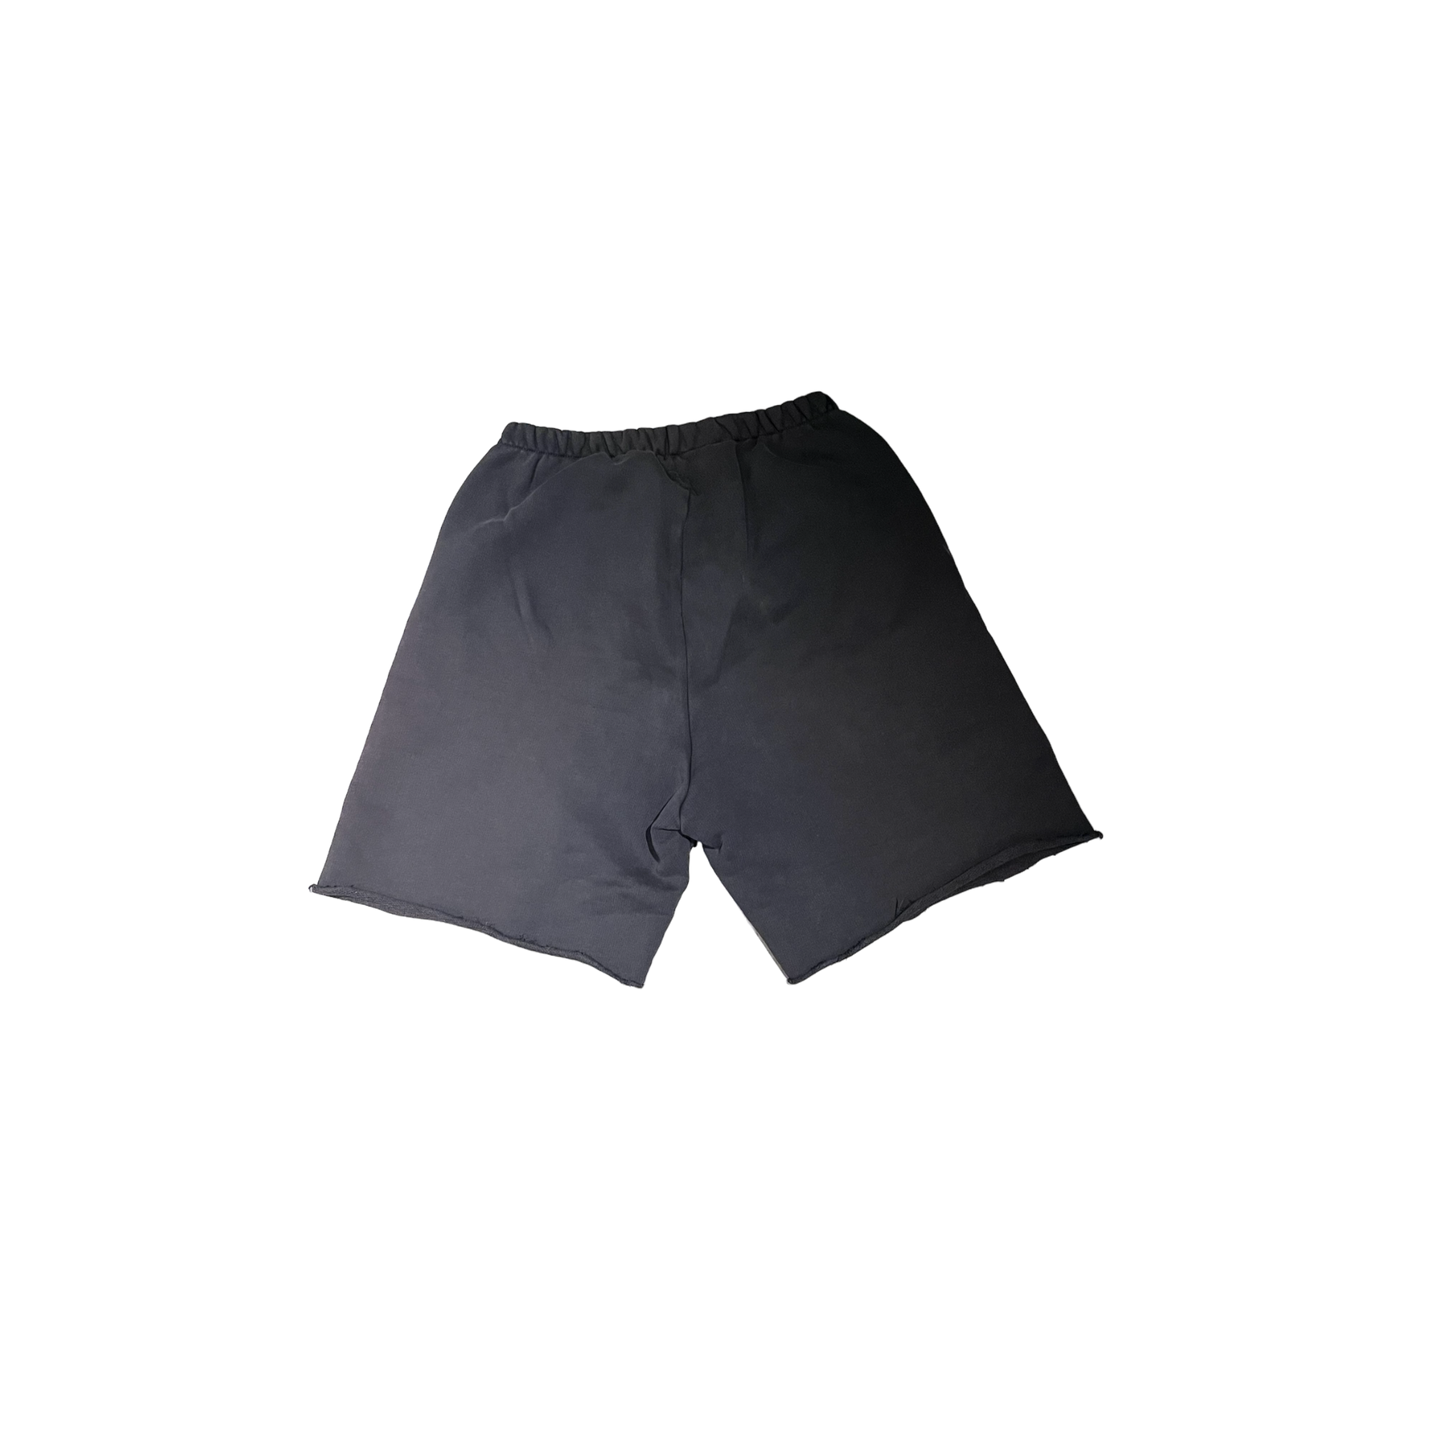 Yeezy Calabasas French Terry Shorts